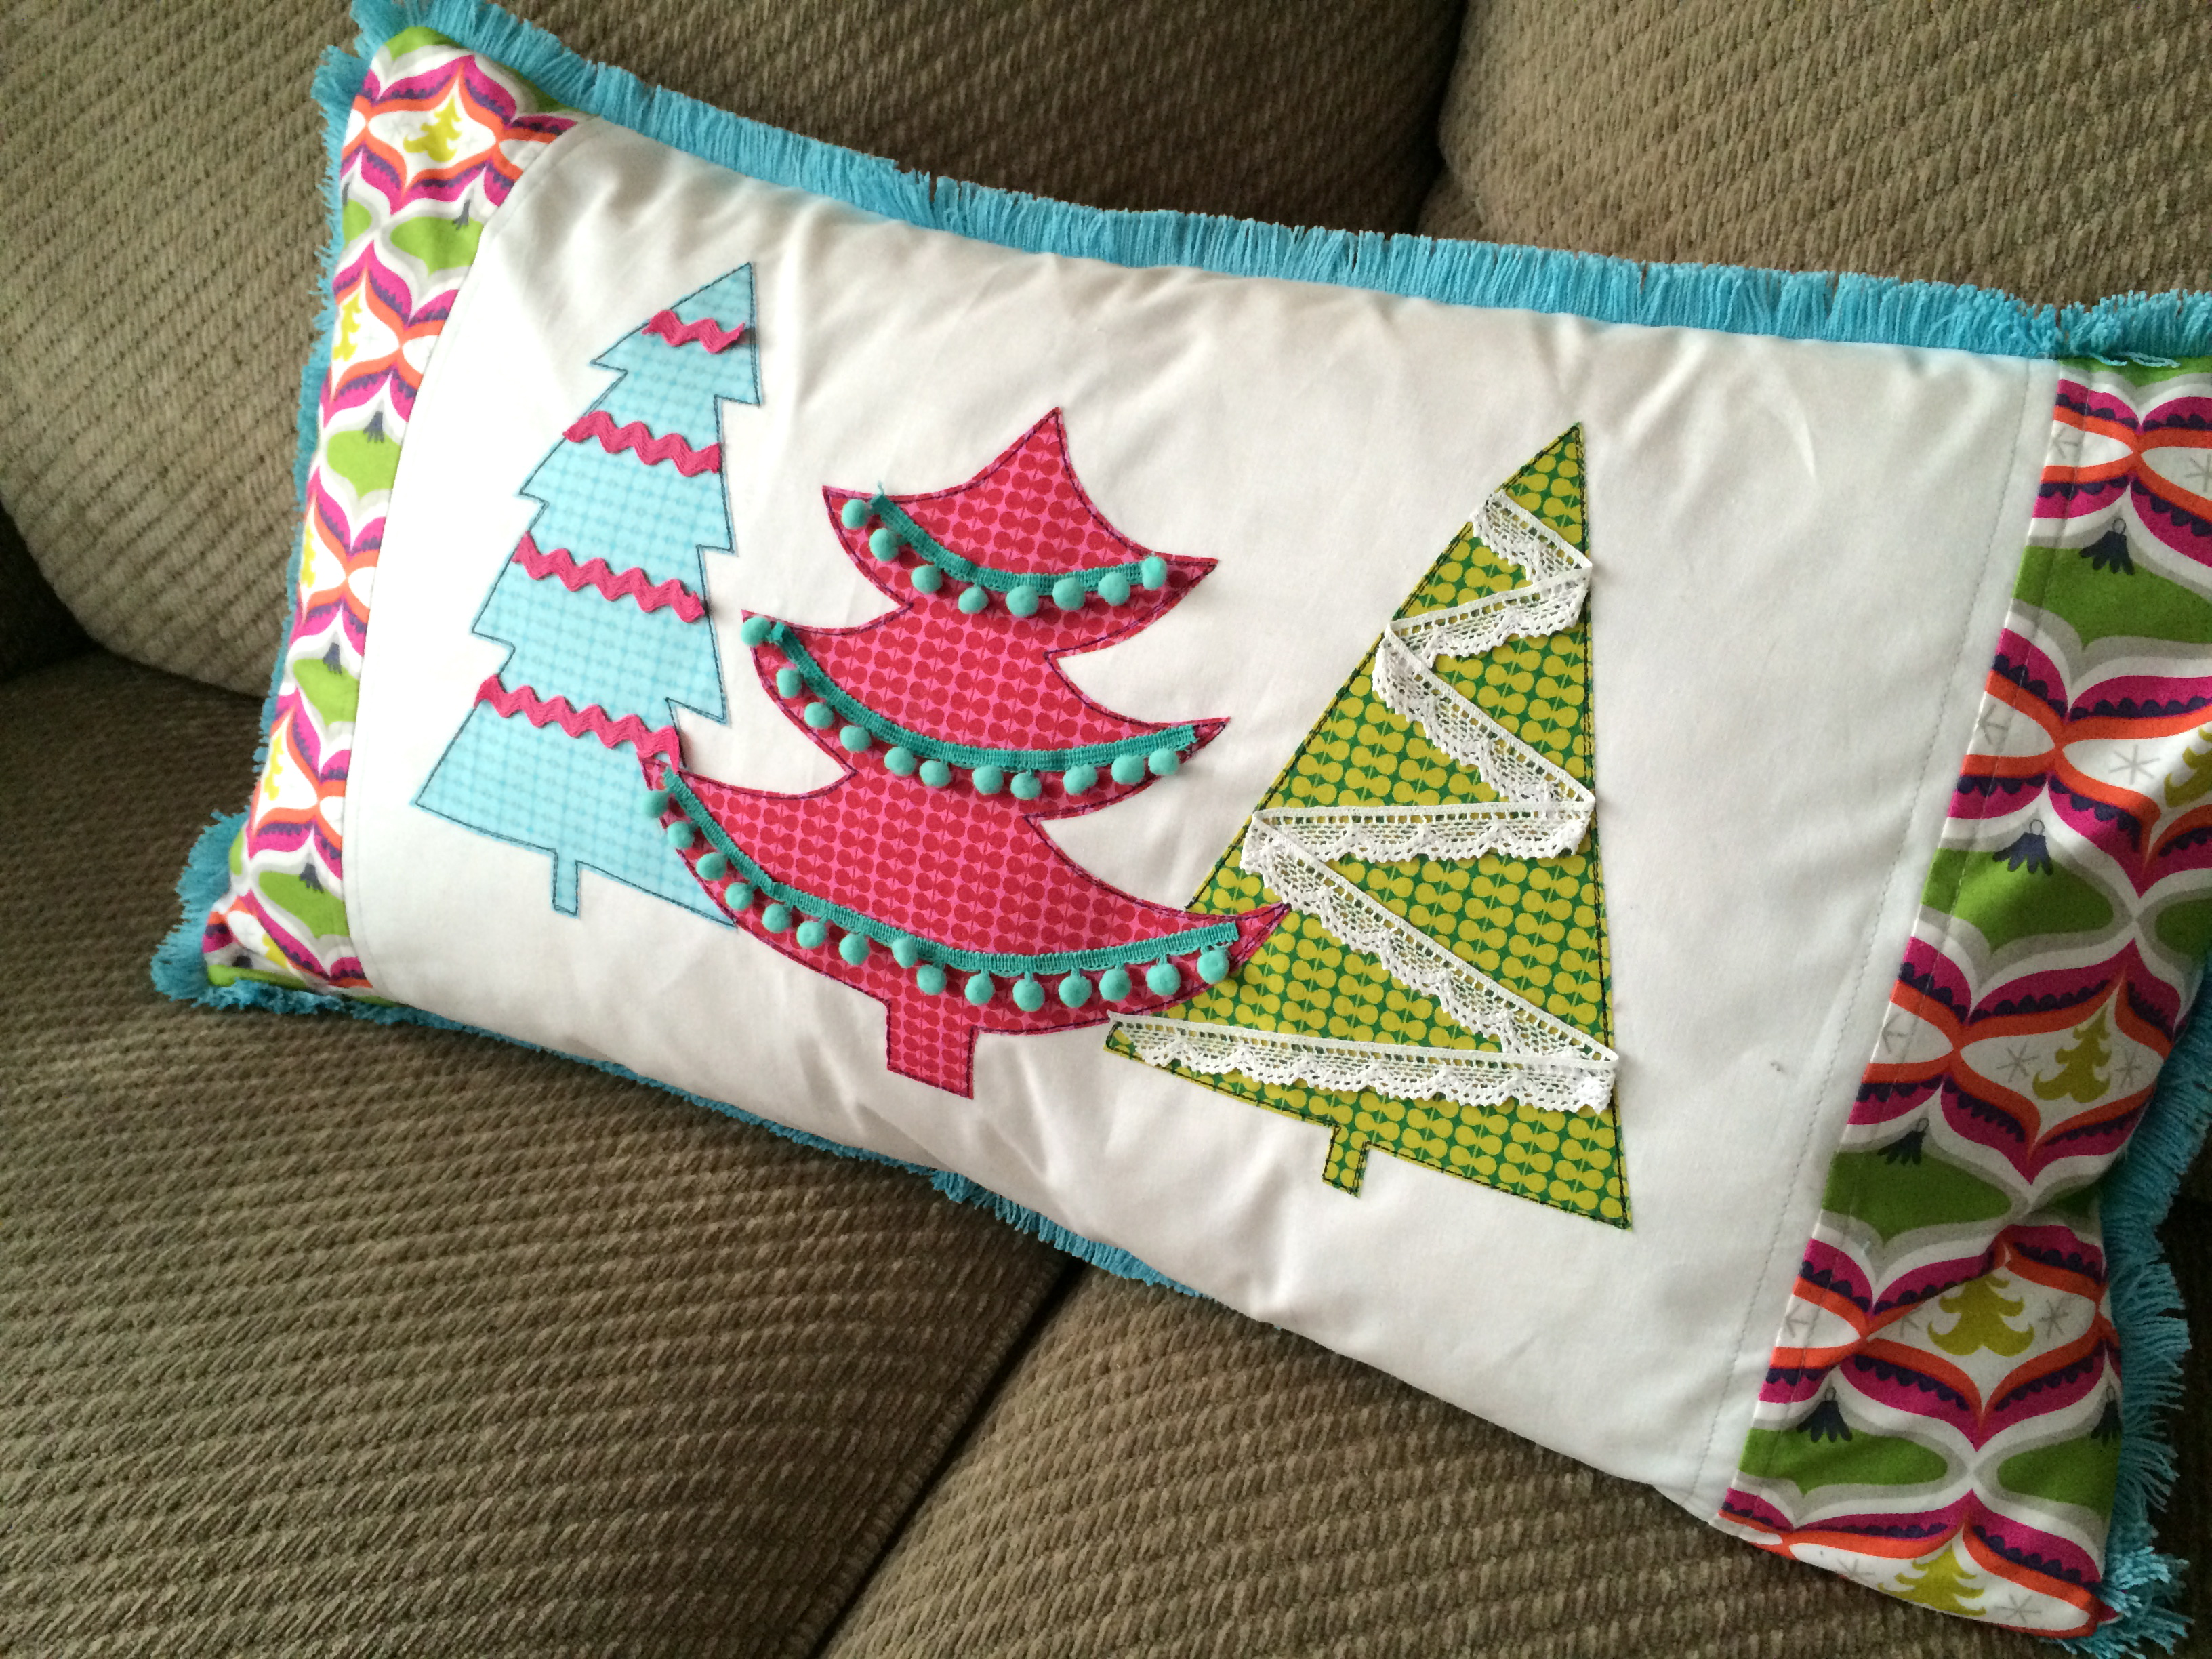 Patchwork Quilted Christmas Pillow Tutorial